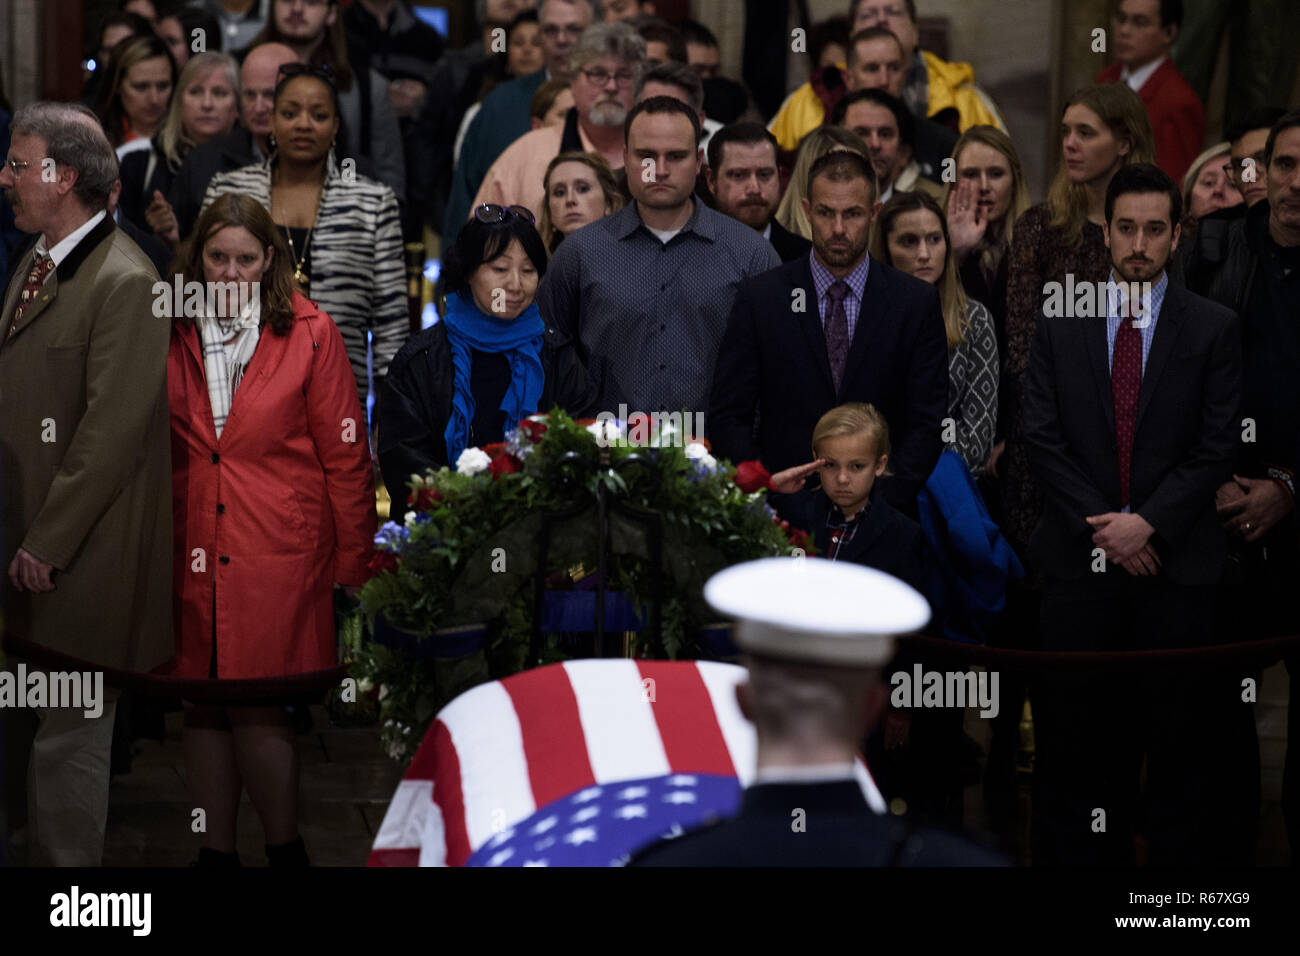 Washington, District of Columbia, USA. 3rd Dec, 2018. Stephen G. Leighton Jr. salutes while paying respects with his father Stephen G. Leighton Sr. as the remains of former US President George H. W. Bush lie in state in the US Capitol's rotunda December 3, 2018 in Washington, DC. Credit: Brendan Smialowski/CNP/ZUMA Wire/Alamy Live News Stock Photo